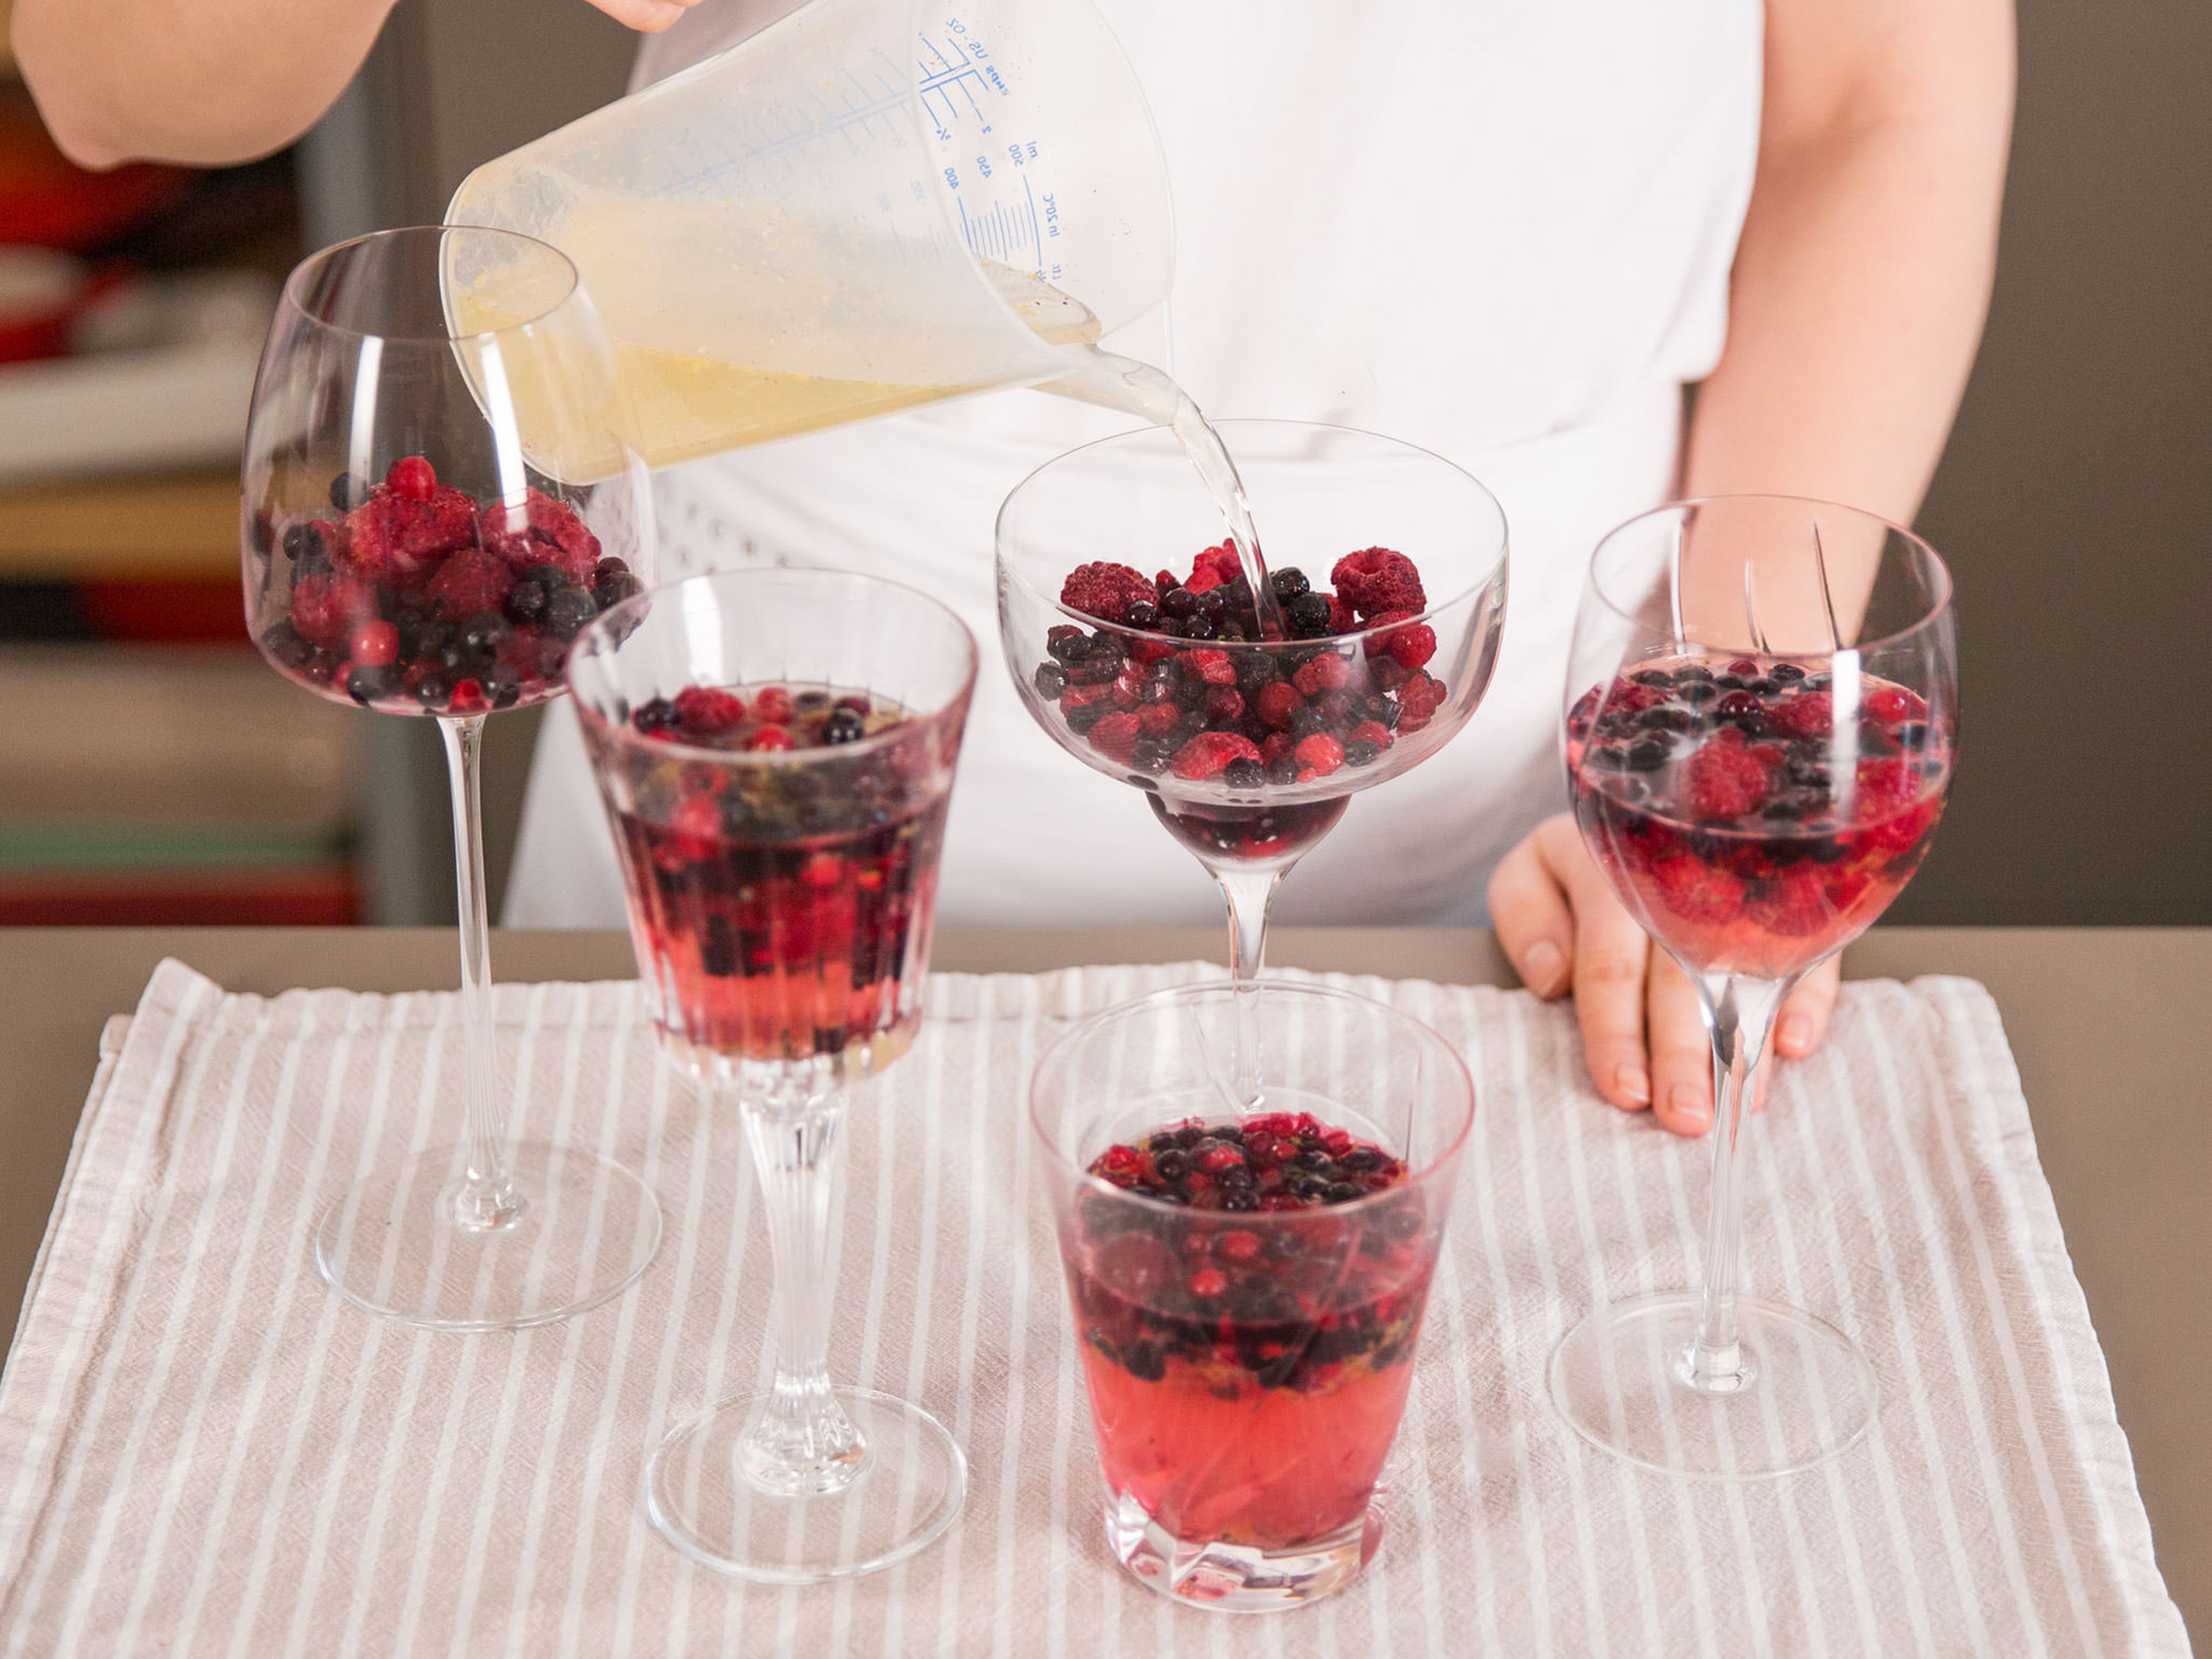 Distribute frozen berries in serving glasses. Add Prosecco to the cooled mixture in the sauce pan, whisk and immediately pour over the frozen berries. Leave to chill for at least 10 min. to allow the gelatin to solidify.